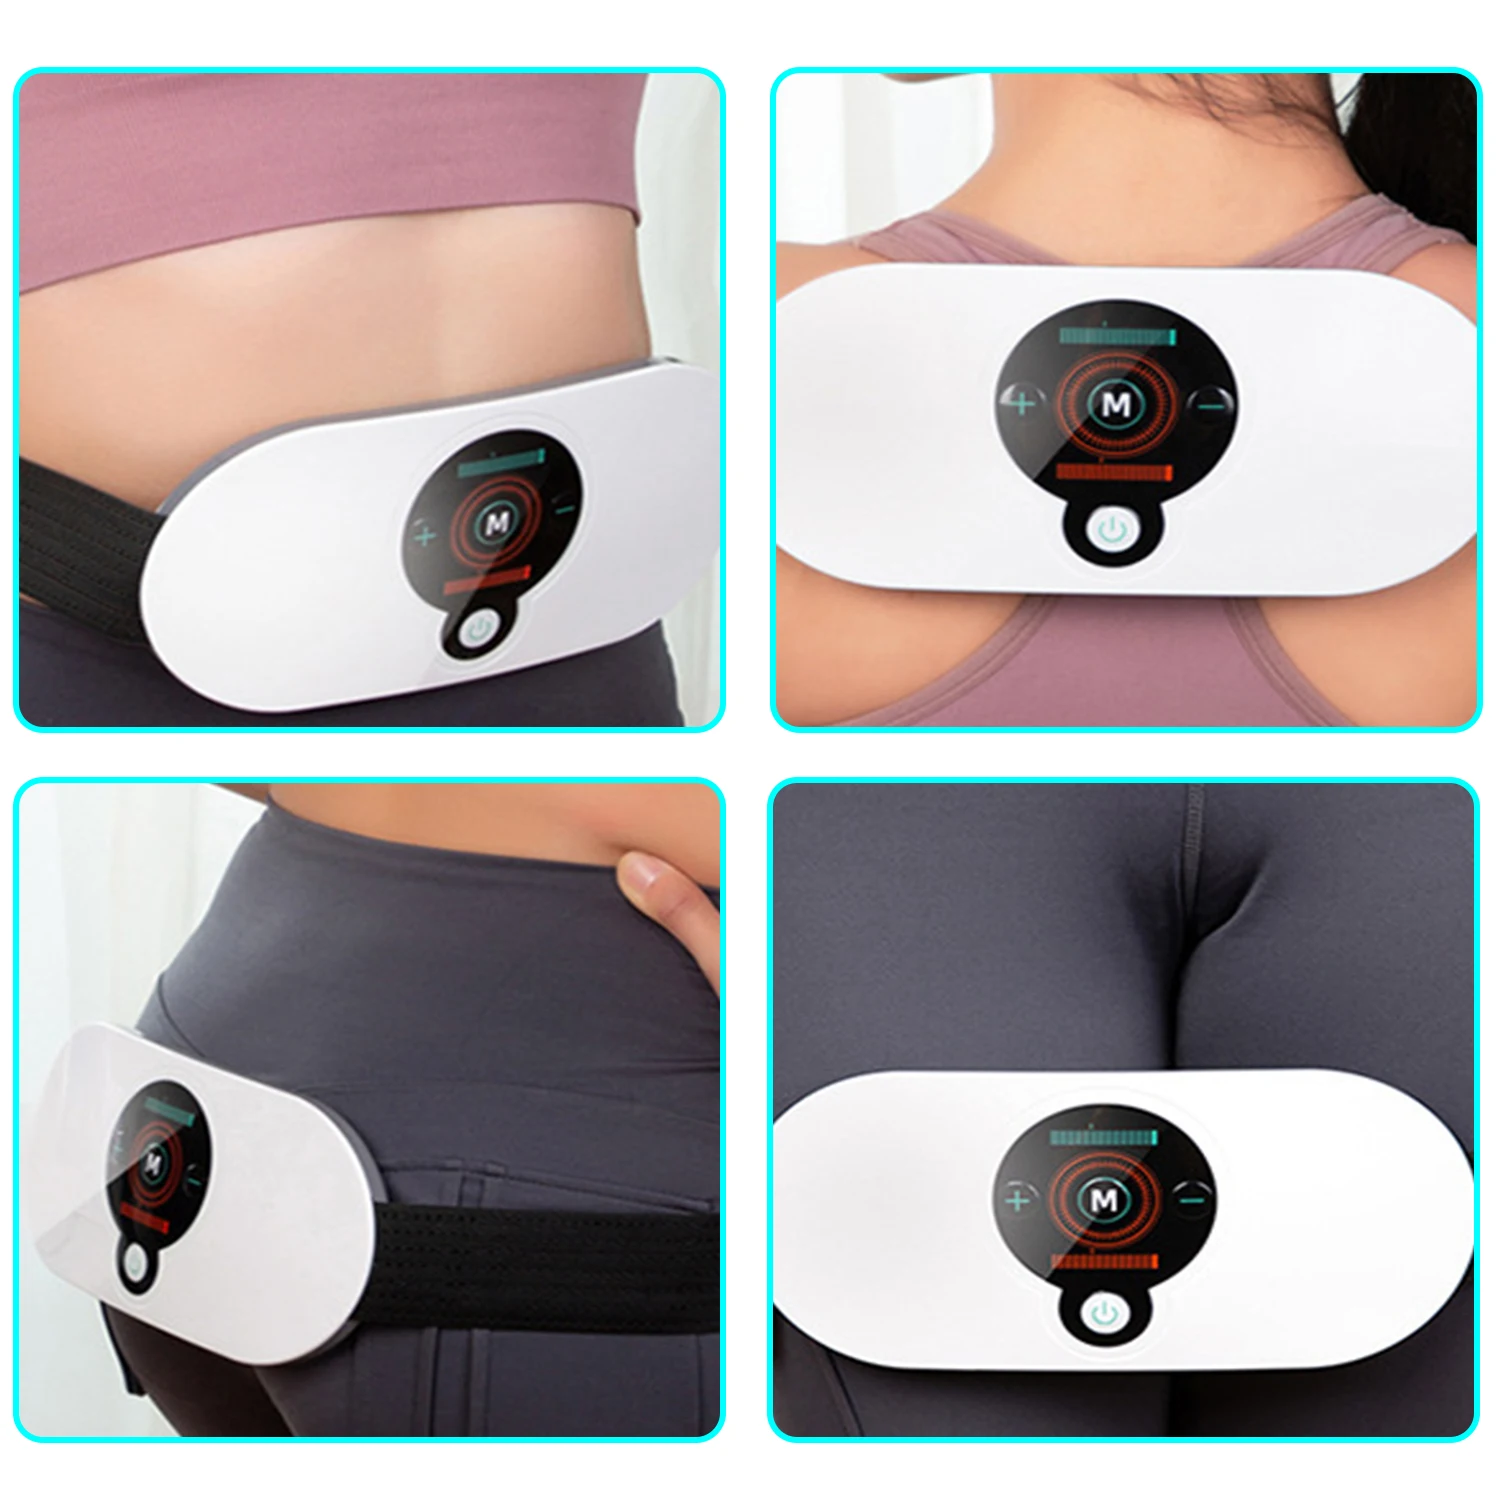  Electric Slimming Belt, with Hot Compress,360° Full  CircleHeating,4 Massage Modes, Widening, Relieve Belly Waist Pain, Must  Plug in Use, Free Measuring Ruler, for Women & Men : Health & Household